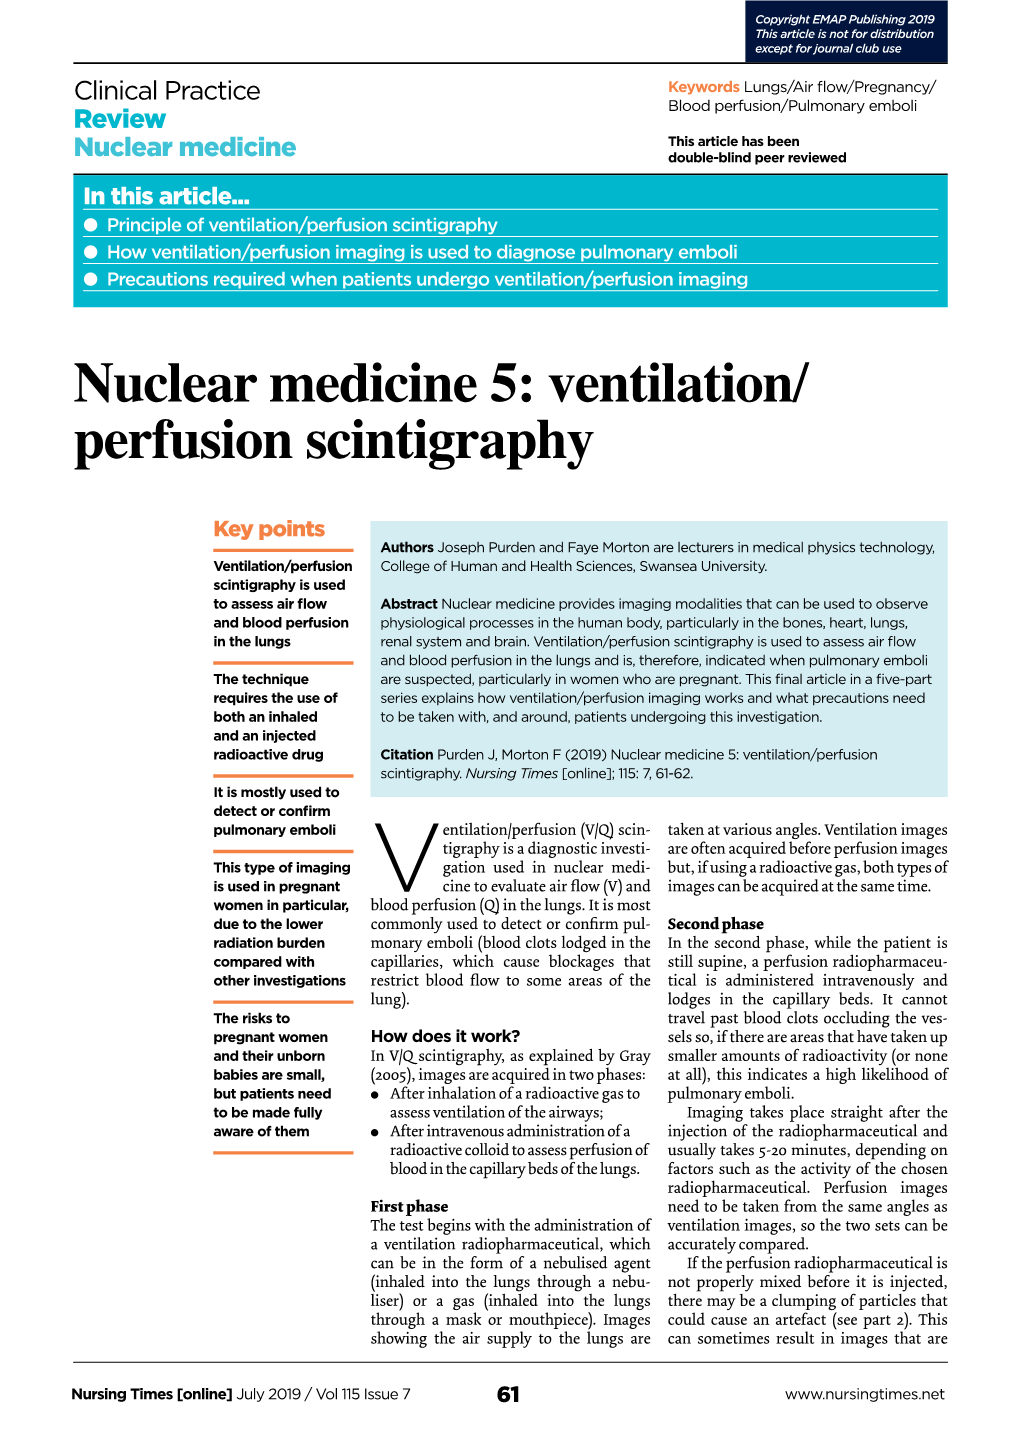 Nuclear Medicine 5: Ventilation/ Perfusion Scintigraphy